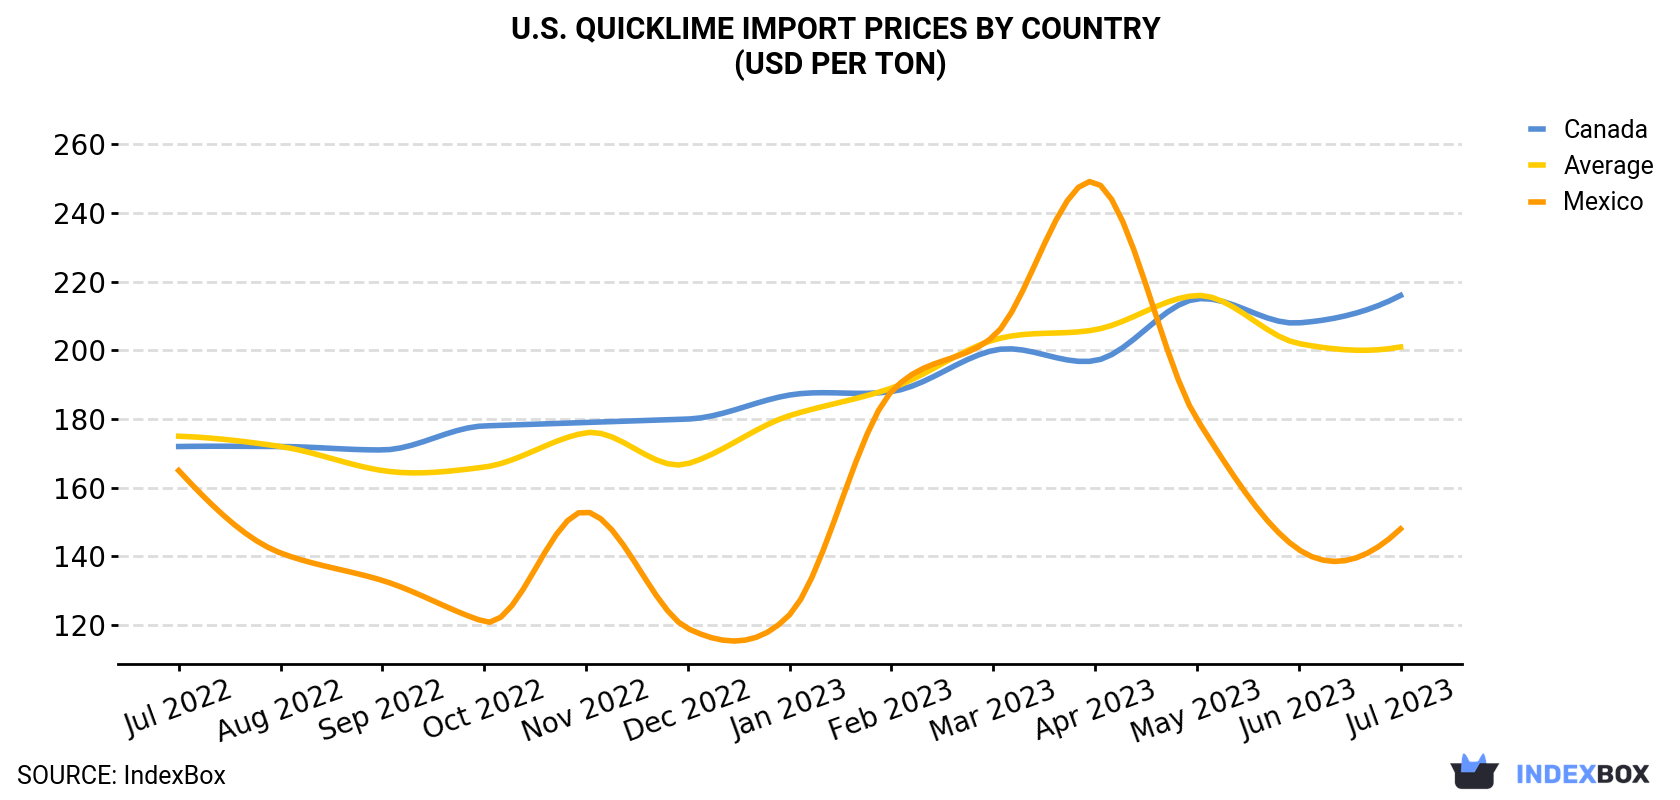 U.S. Quicklime Import Prices By Country (USD Per Ton)